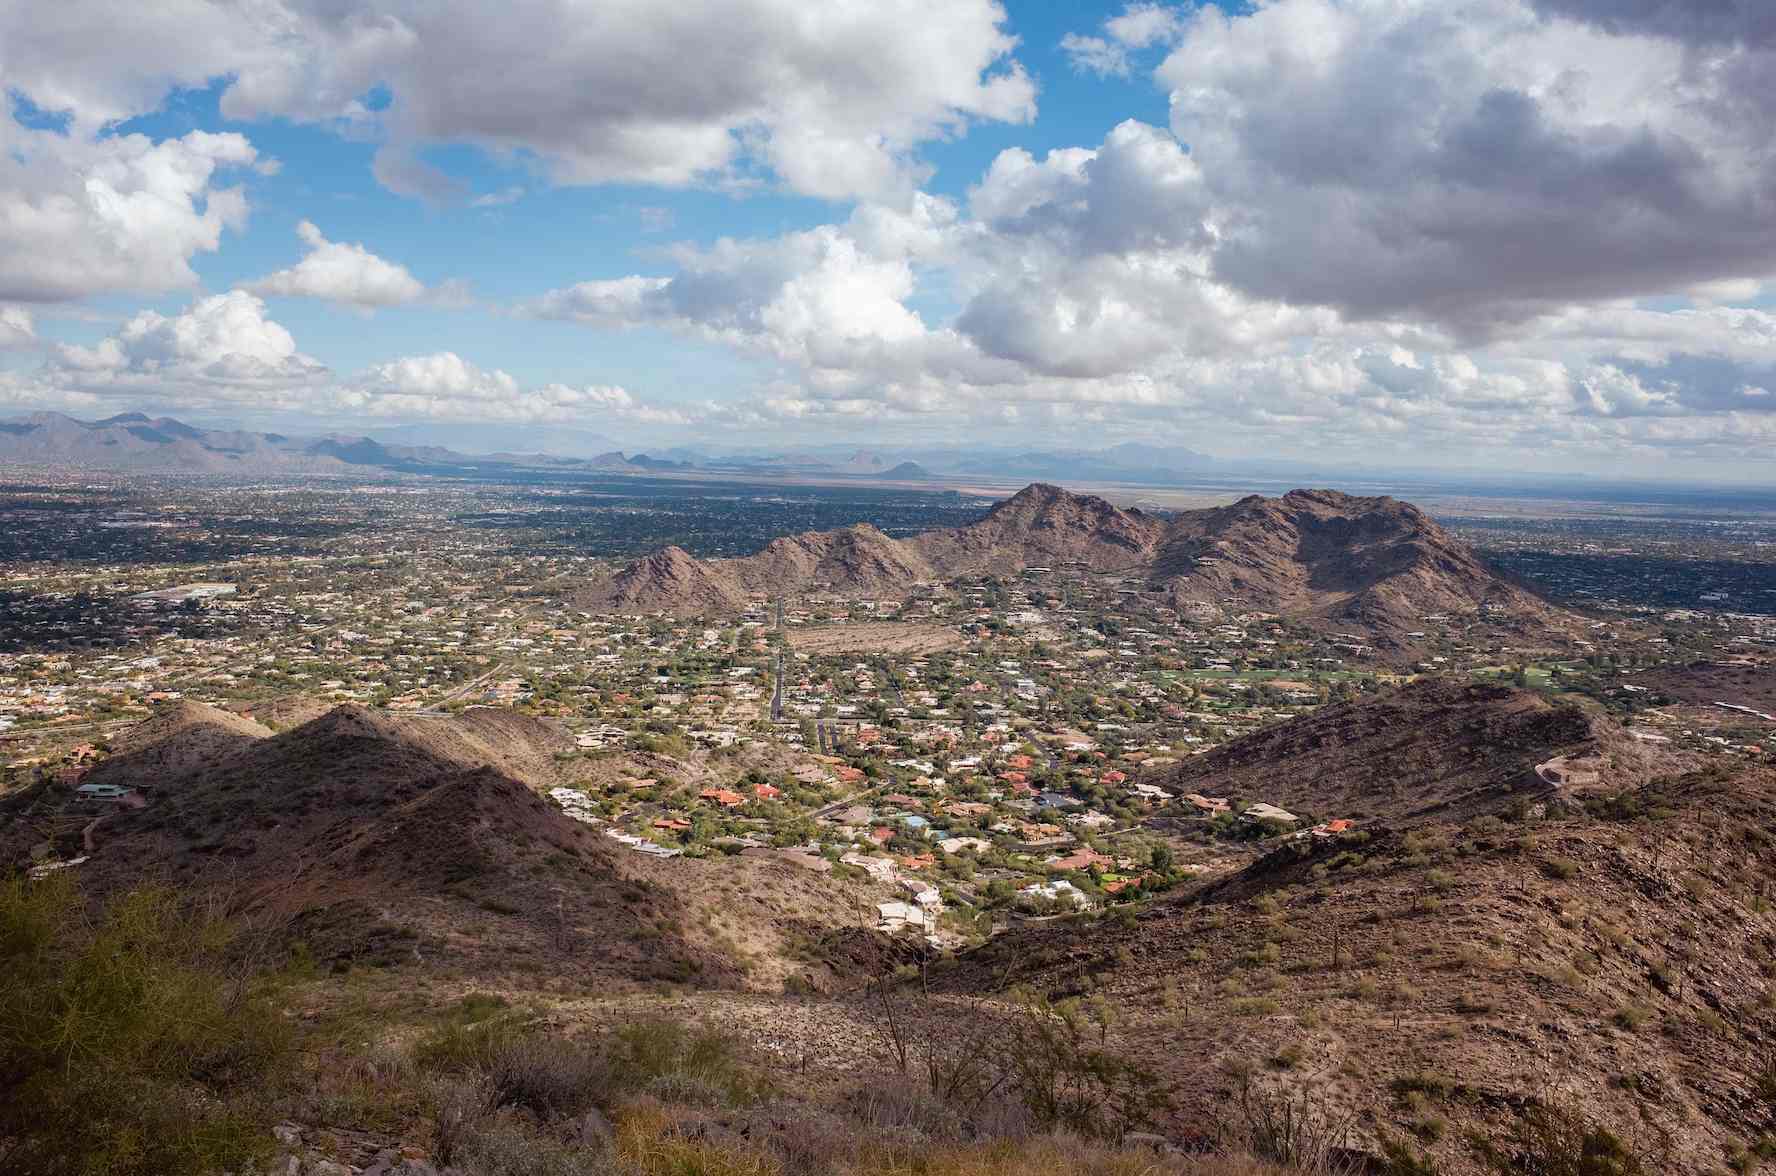 This is an aerial view of Scottsdale, Arizona.